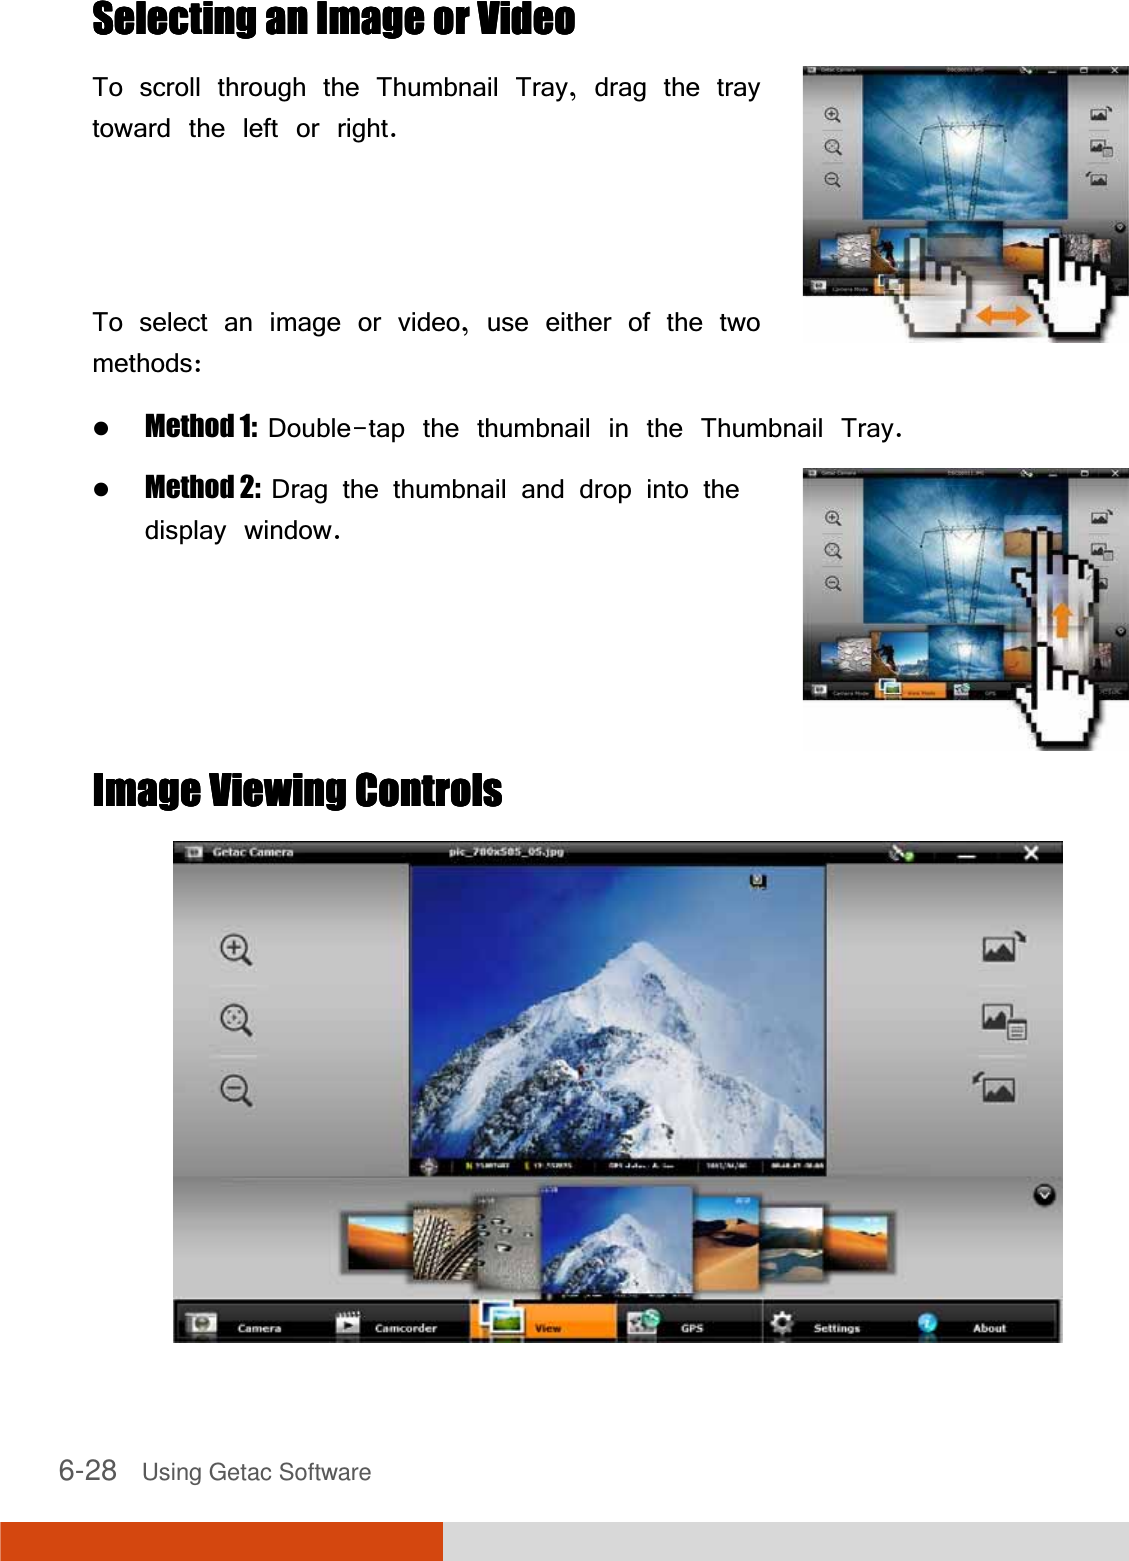 6-28   Using Getac Software Selecting an Image or VideoSelecting an Image or VideoSelecting an Image or VideoSelecting an Image or Video    To scroll through the Thumbnail Tray, drag the tray toward the left or right.    To select an image or video, use either of the twomethods: Method 1:  Double-tap the thumbnail in the Thumbnail Tray. Method 2:  Drag the thumbnail and drop into thedisplay window.      Image Viewing ControlsImage Viewing ControlsImage Viewing ControlsImage Viewing Controls     